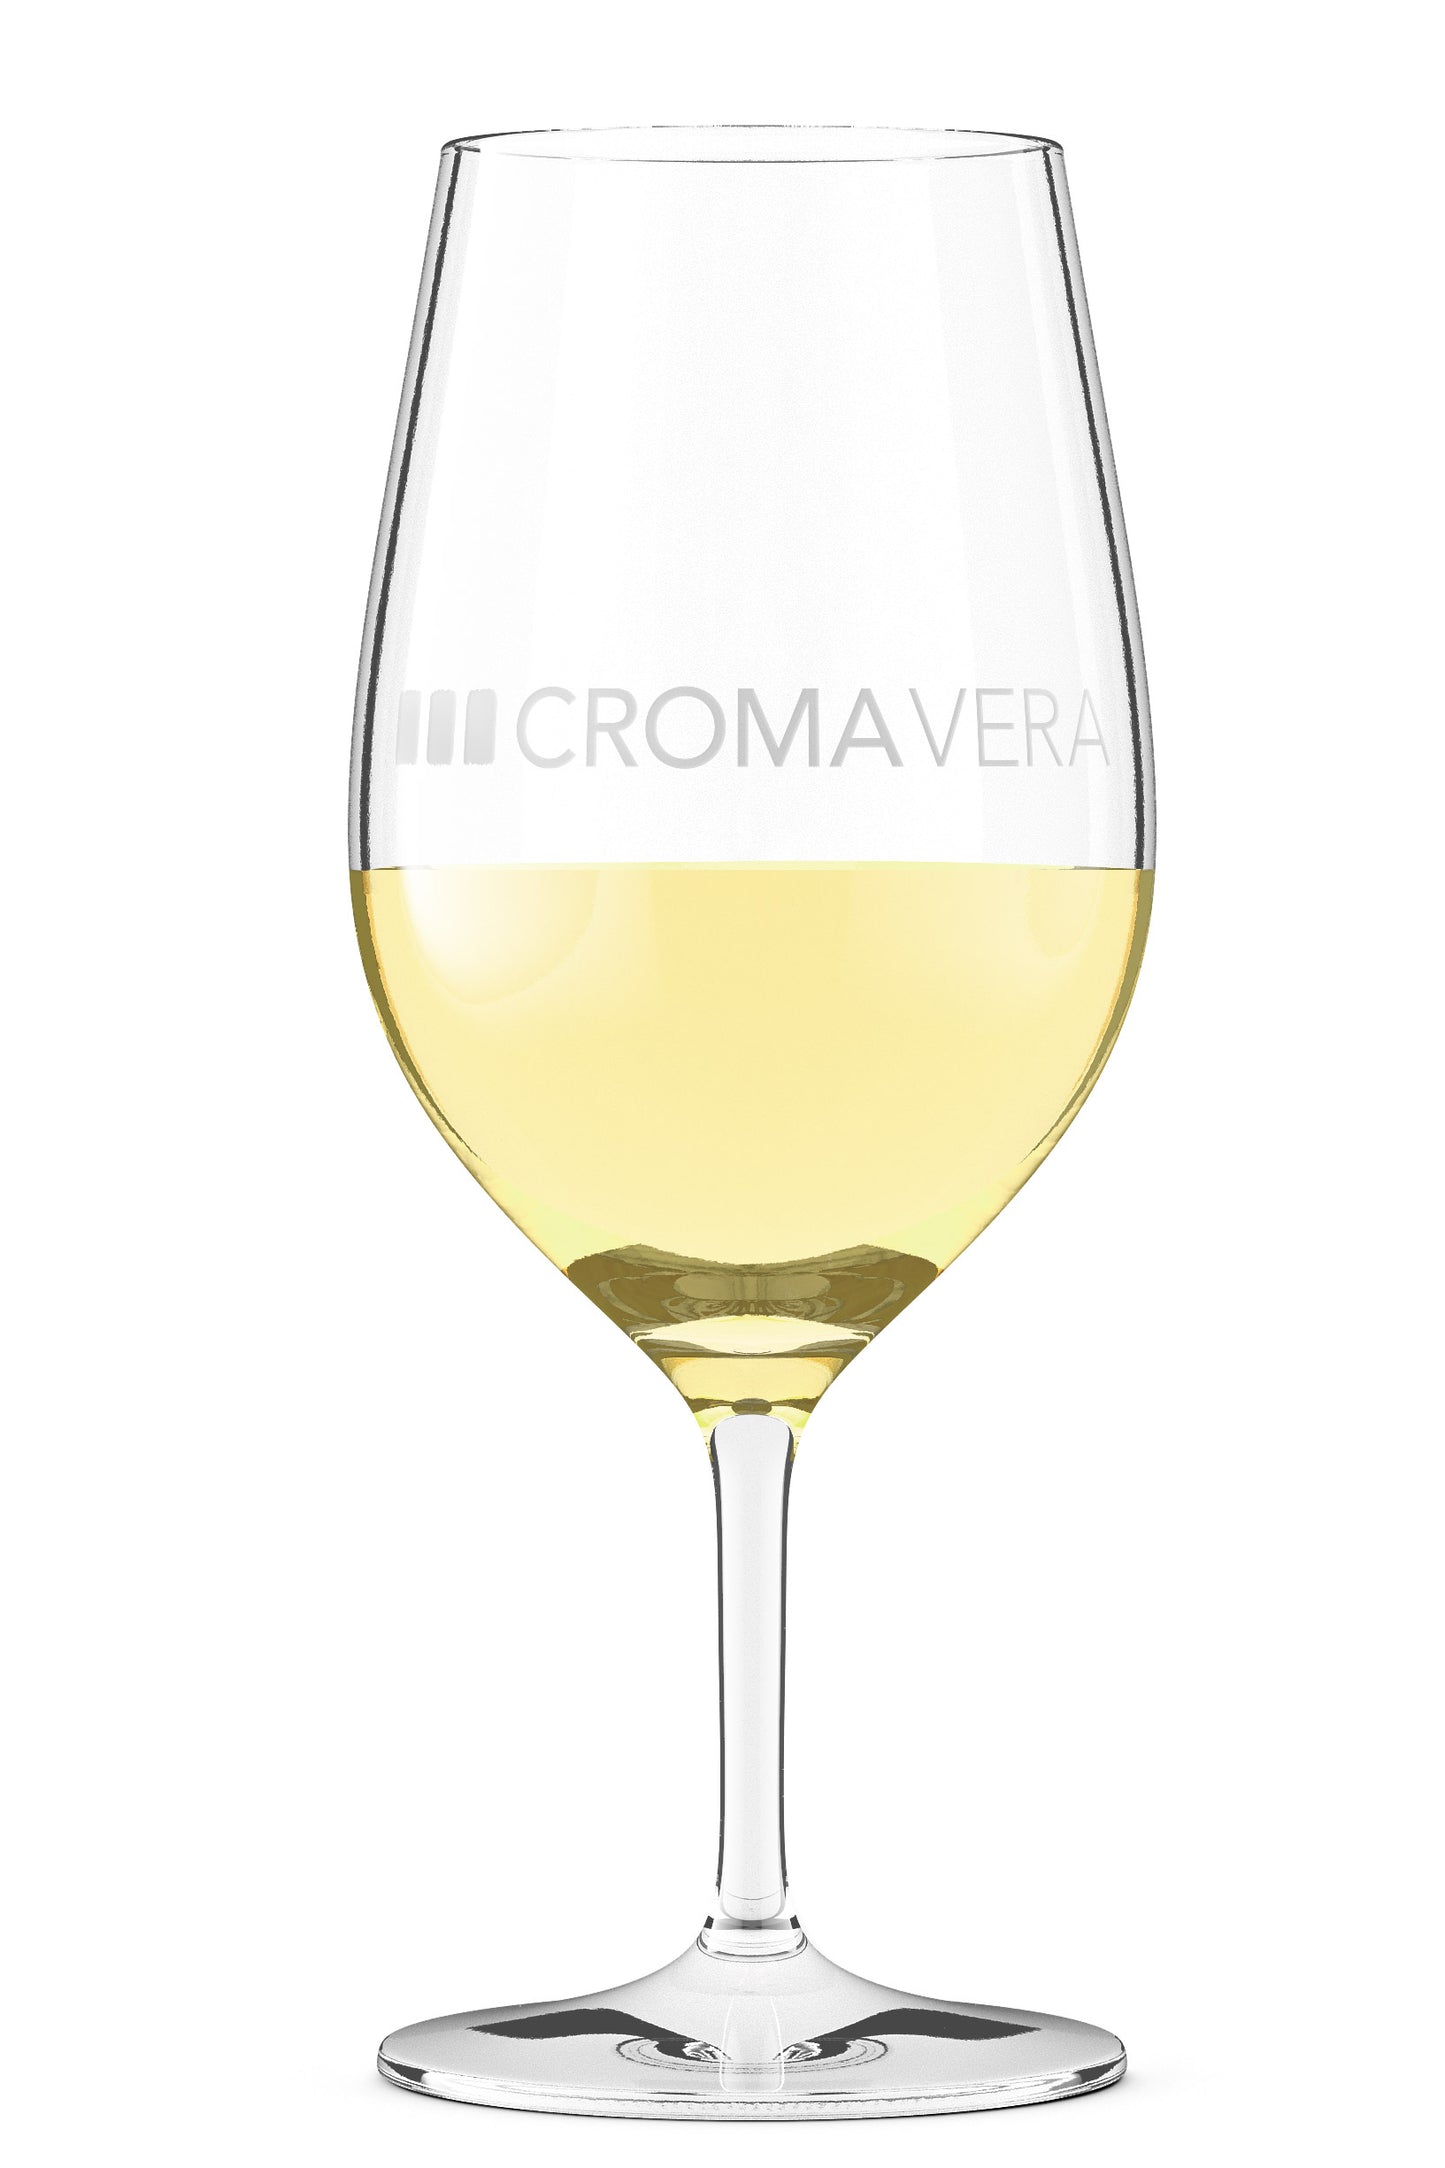 A wine glass filled with Albariño